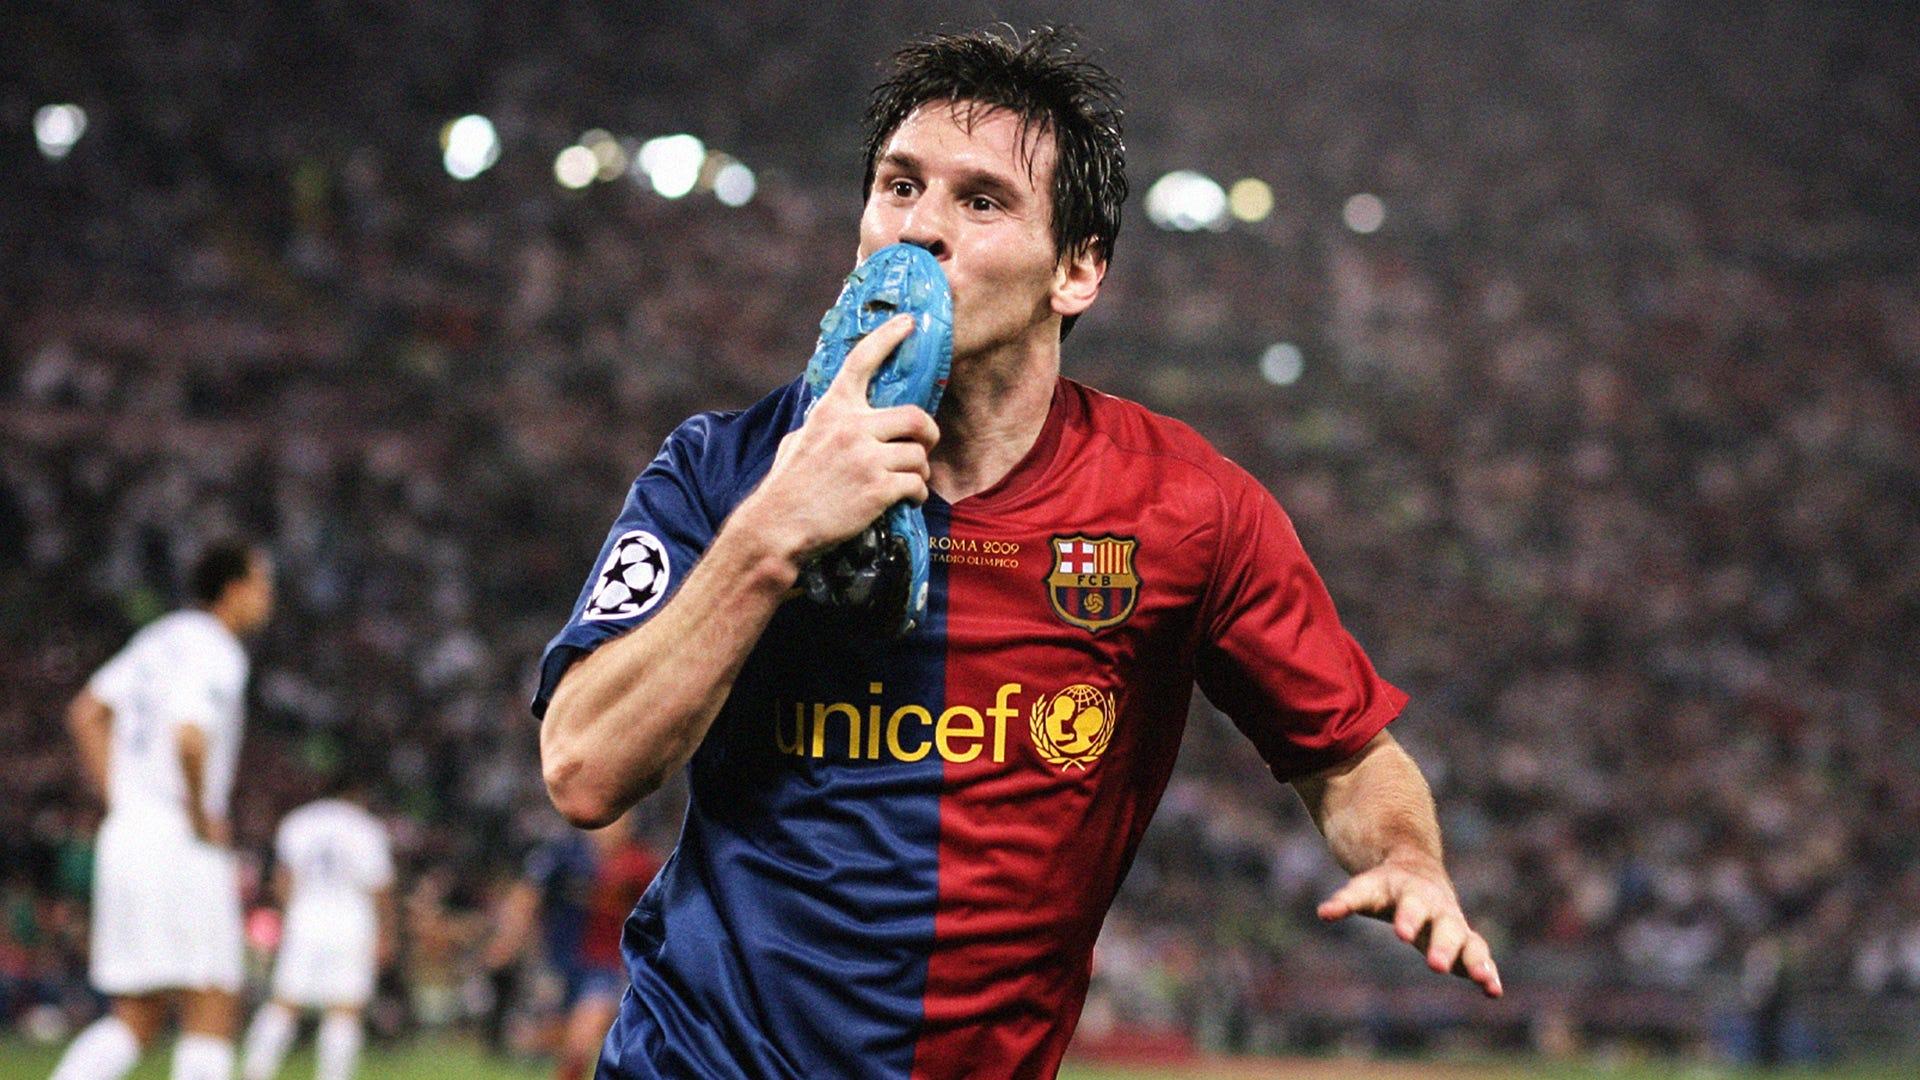 Messi Kiss Wallpapers Top Free Messi Kiss Backgrounds Wallpaperaccess 0375